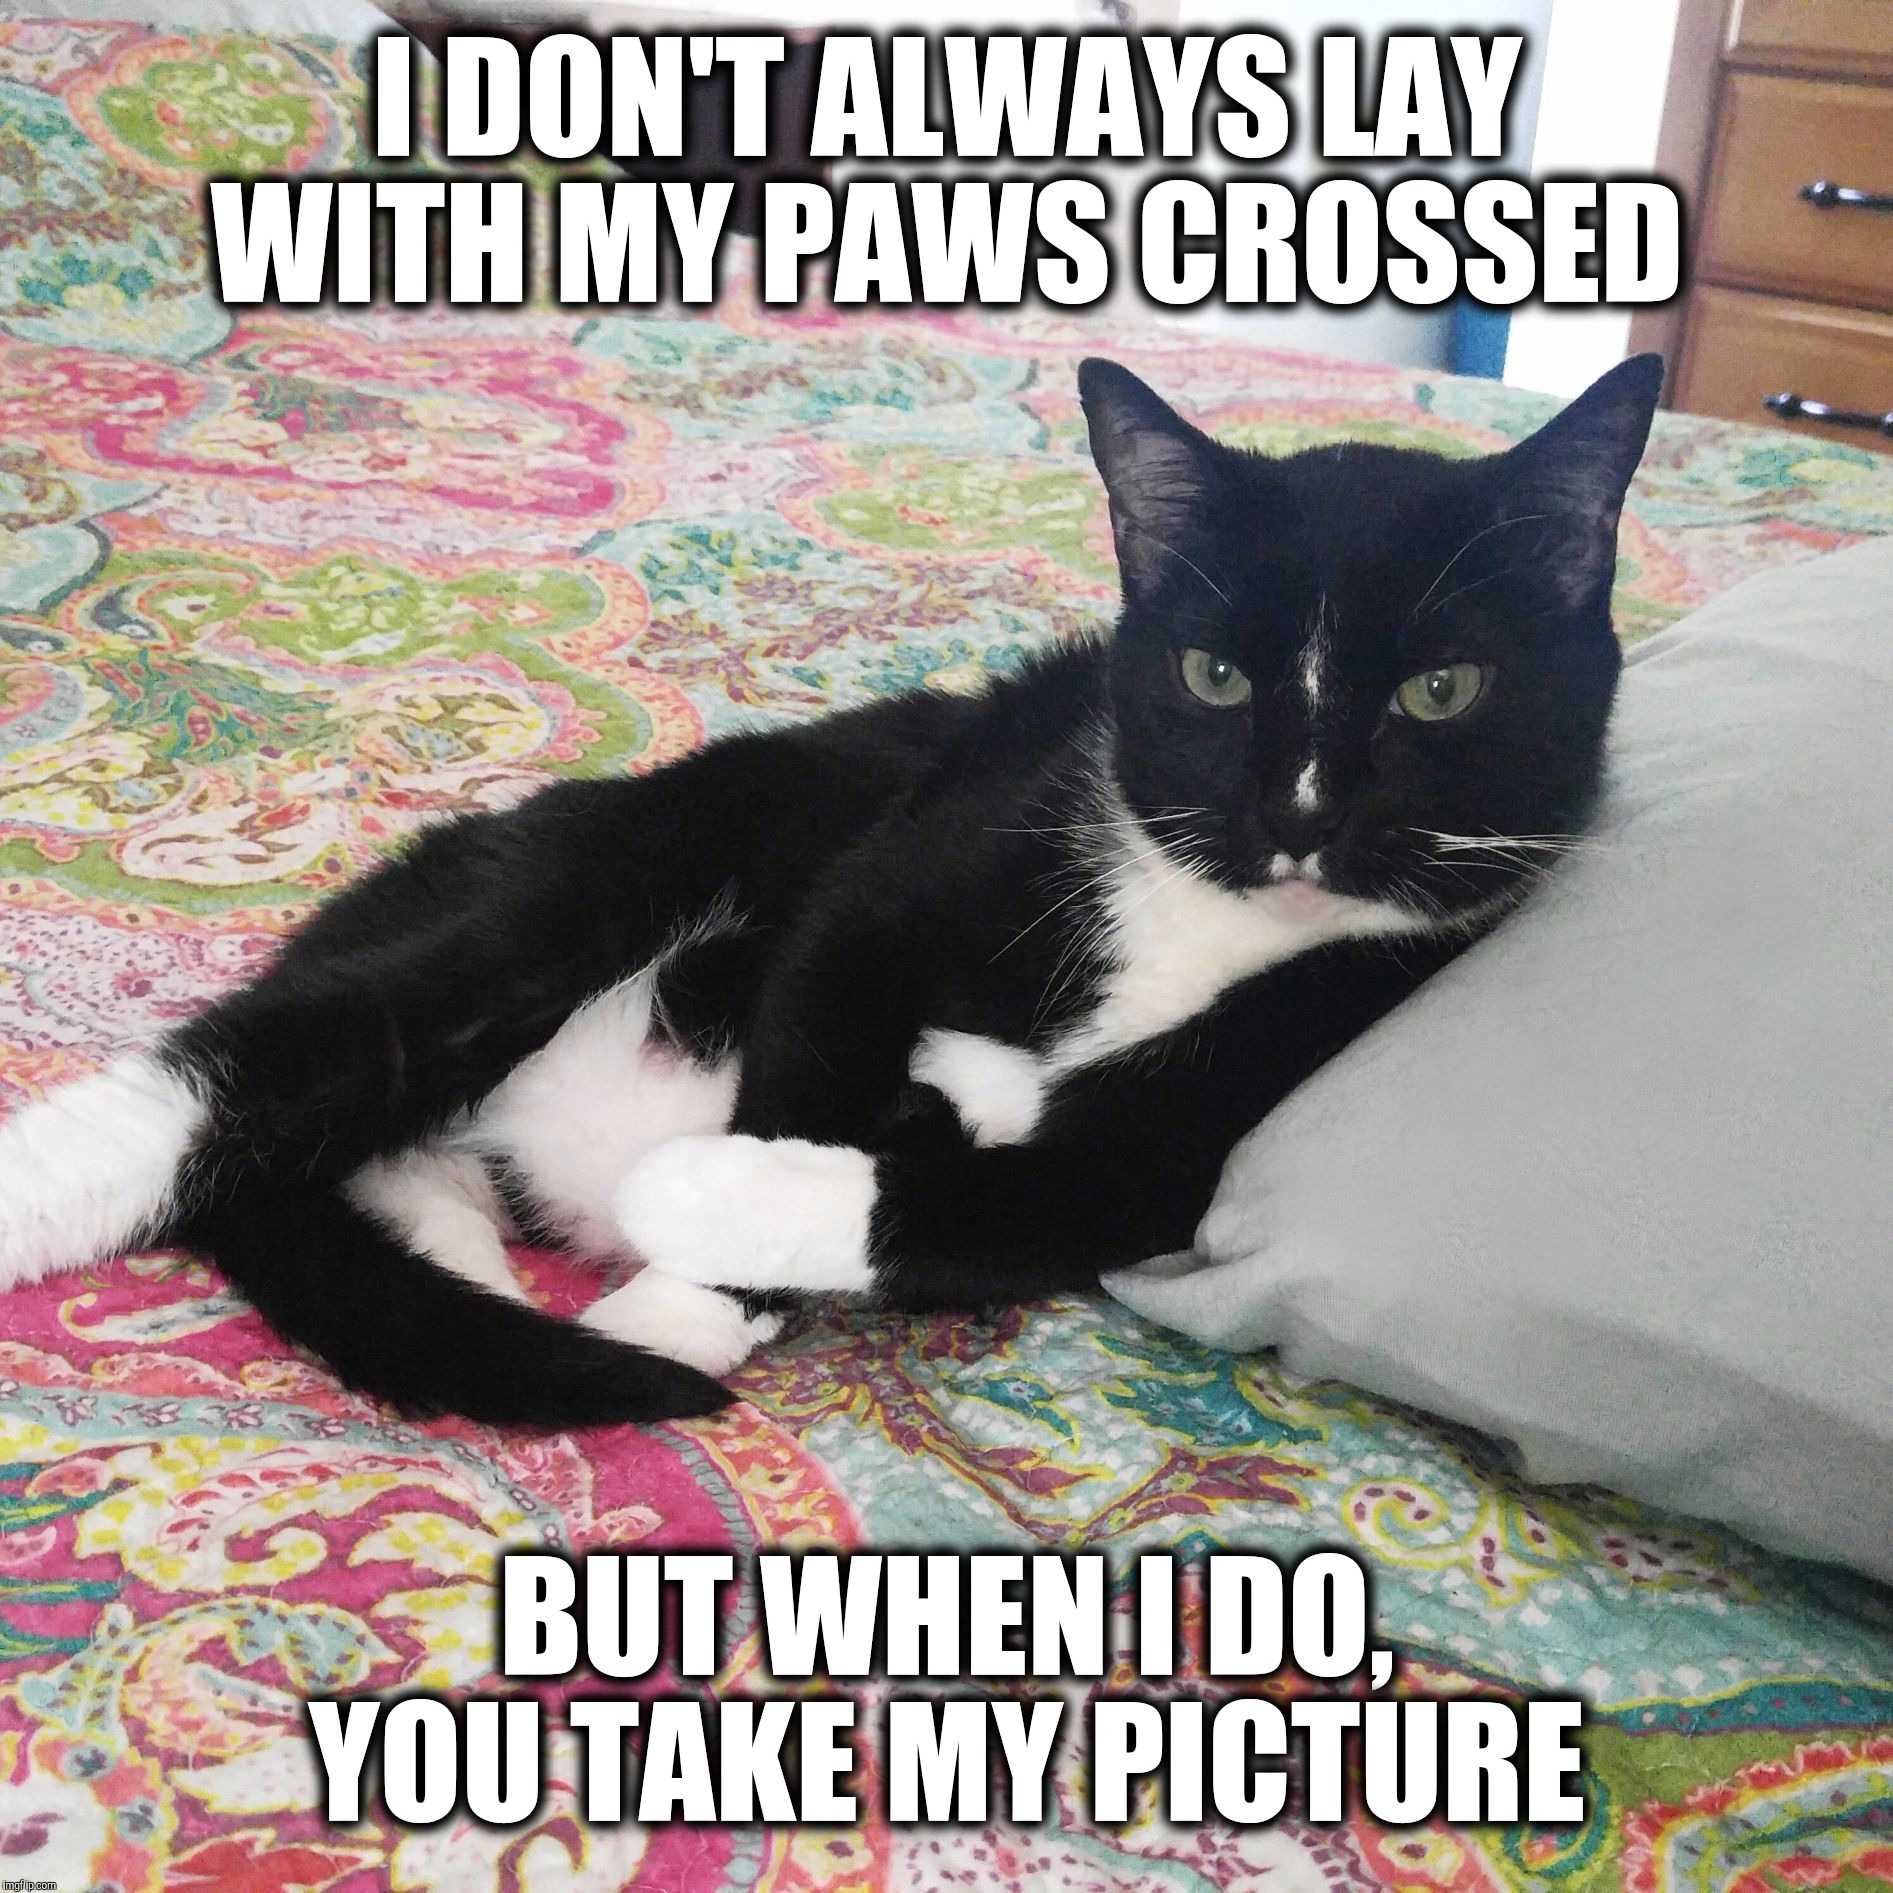 Debonair Cat |  I DON'T ALWAYS LAY WITH MY PAWS CROSSED; BUT WHEN I DO, YOU TAKE MY PICTURE | image tagged in bert the cat,funny memes,funny cat memes,funny animals,tuxedo cat,cat | made w/ Imgflip meme maker